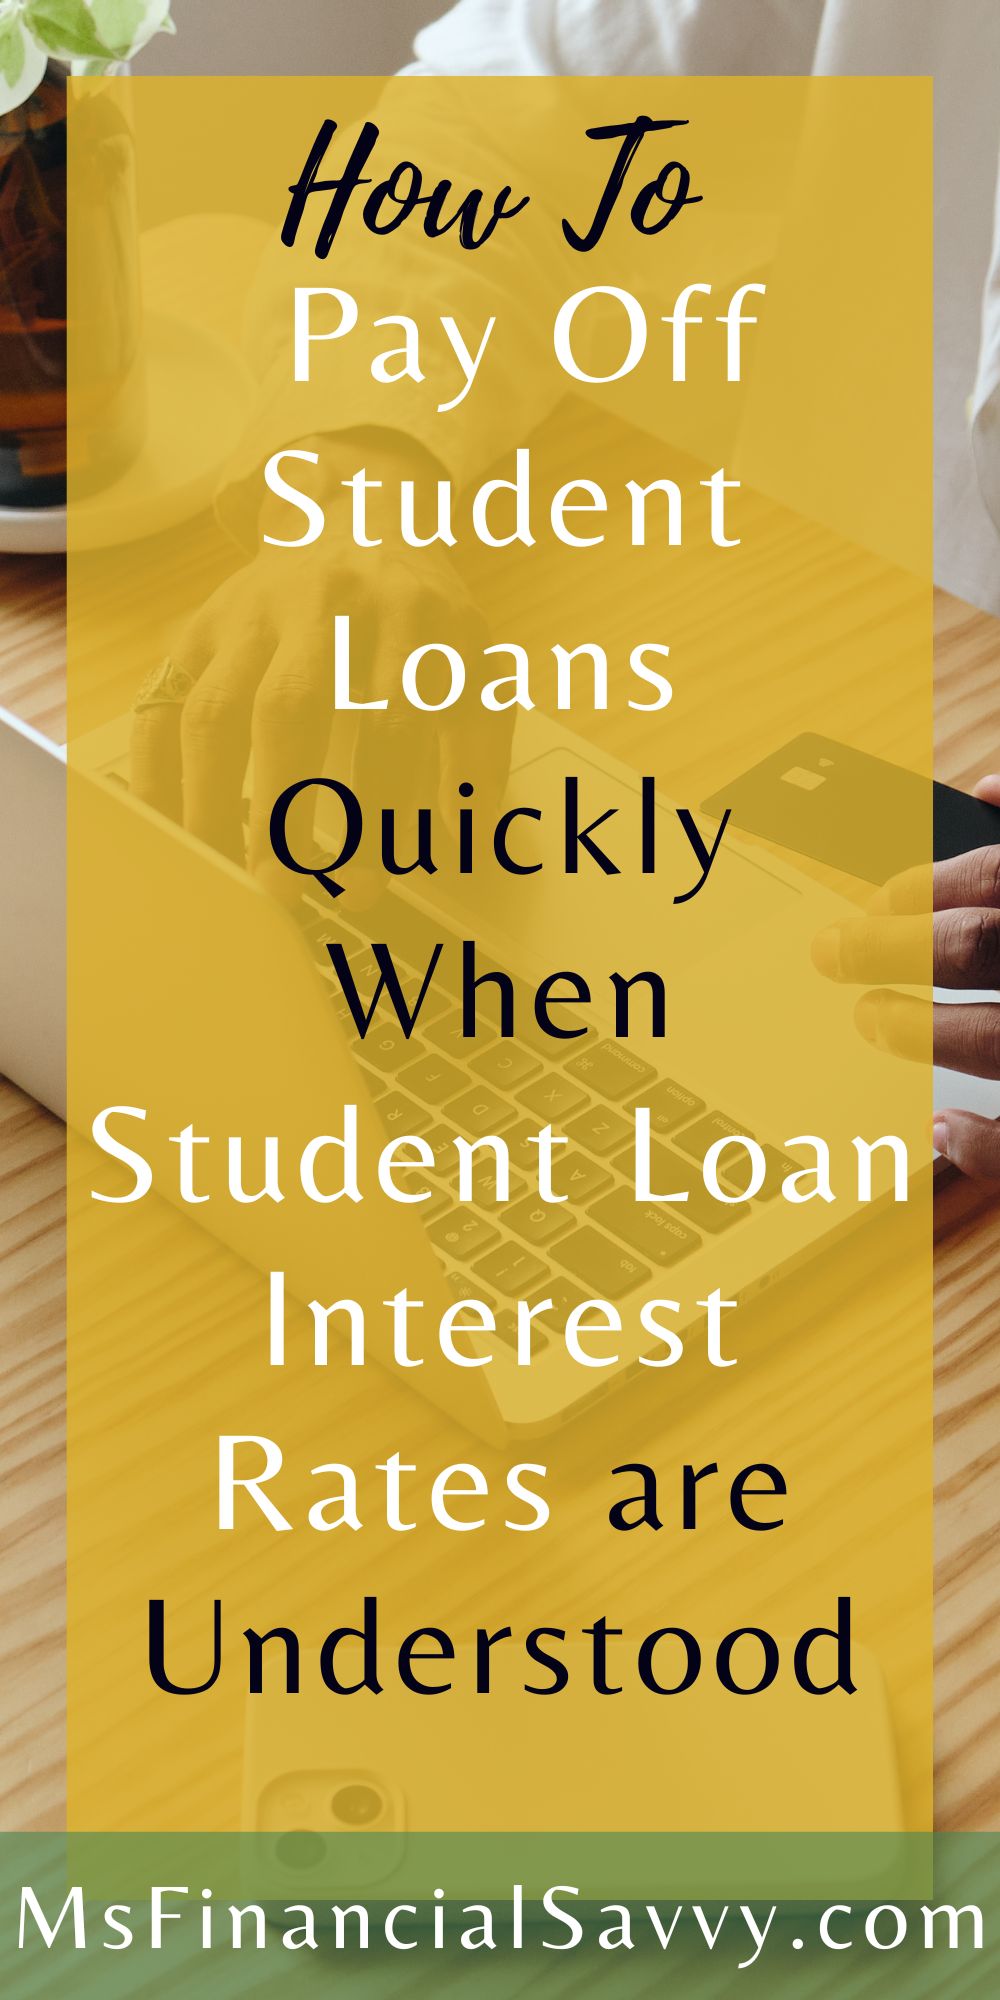 How to Pay Off Student Loans Quickly When Student Loan Interest Rates are Understood